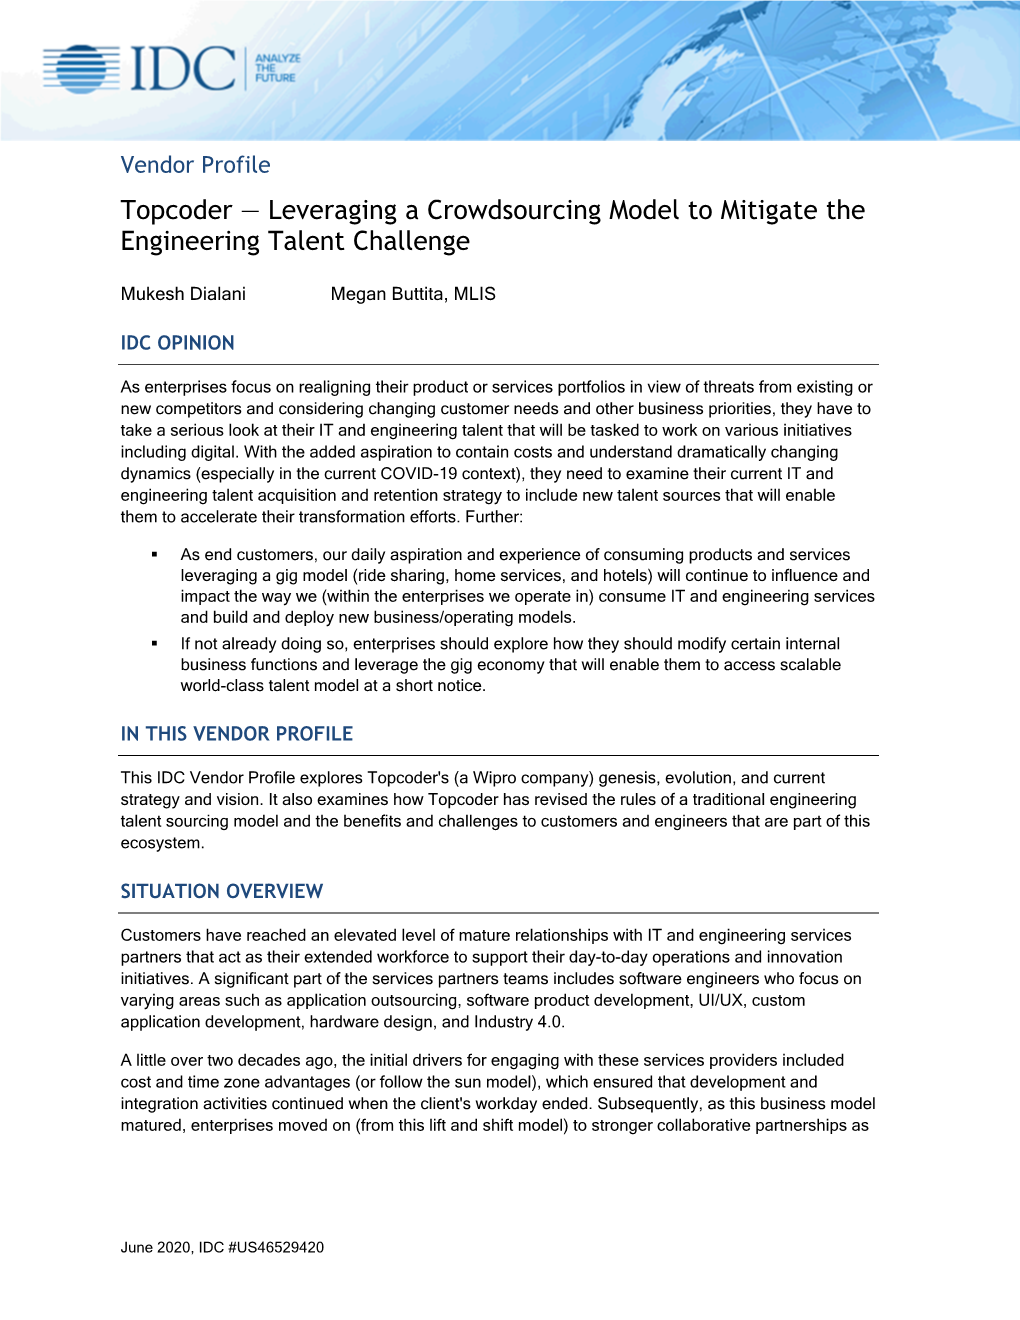 Topcoder — Leveraging a Crowdsourcing Model to Mitigate the Engineering Talent Challenge